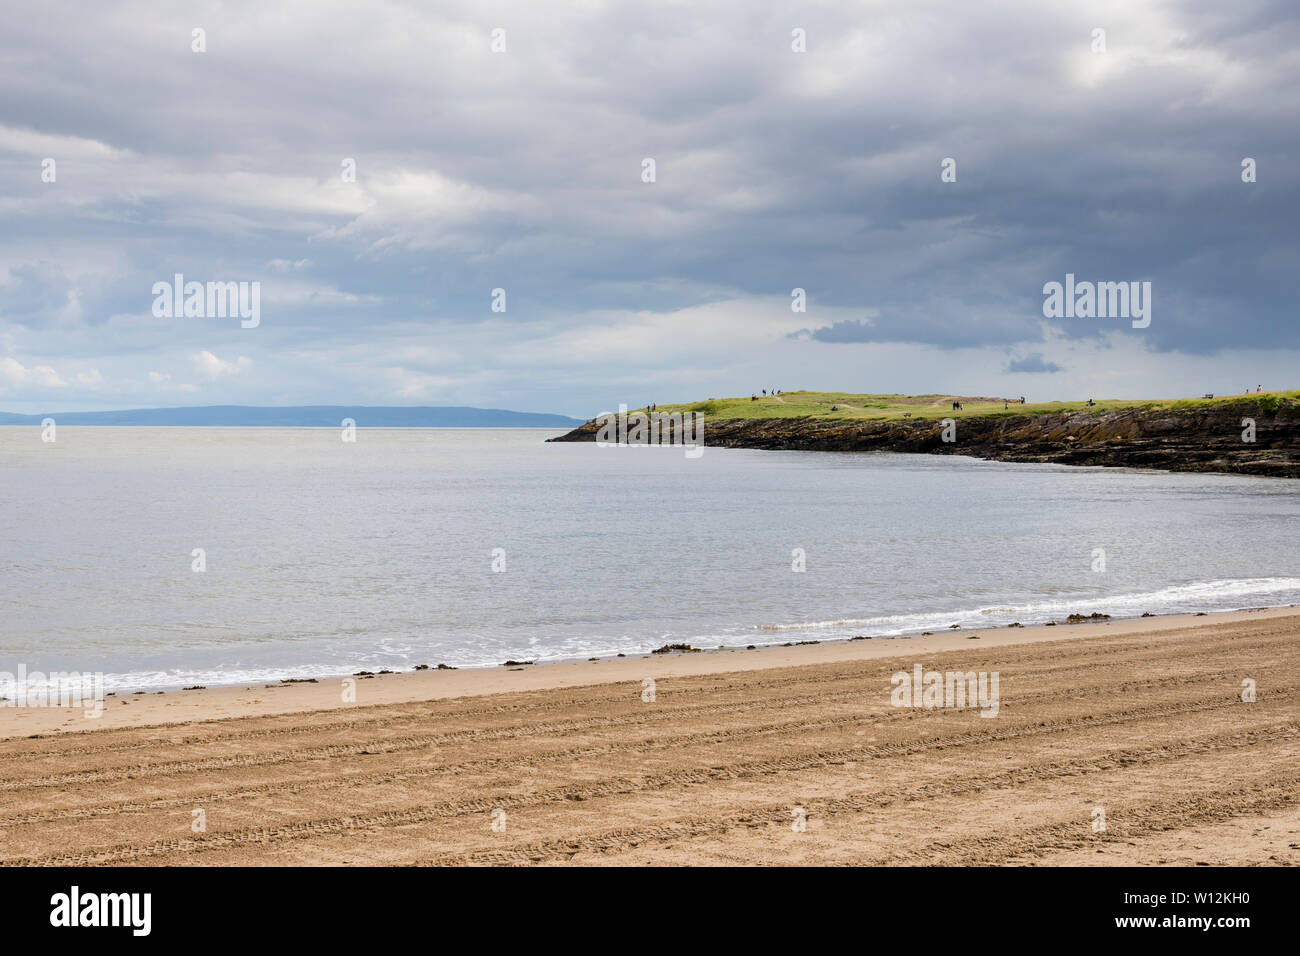 Sun shines during a break in the clouds onto Barry Island's sandy beach, striped by tractor tyre tracks, and the low-lying Friar's point headland. Stock Photo